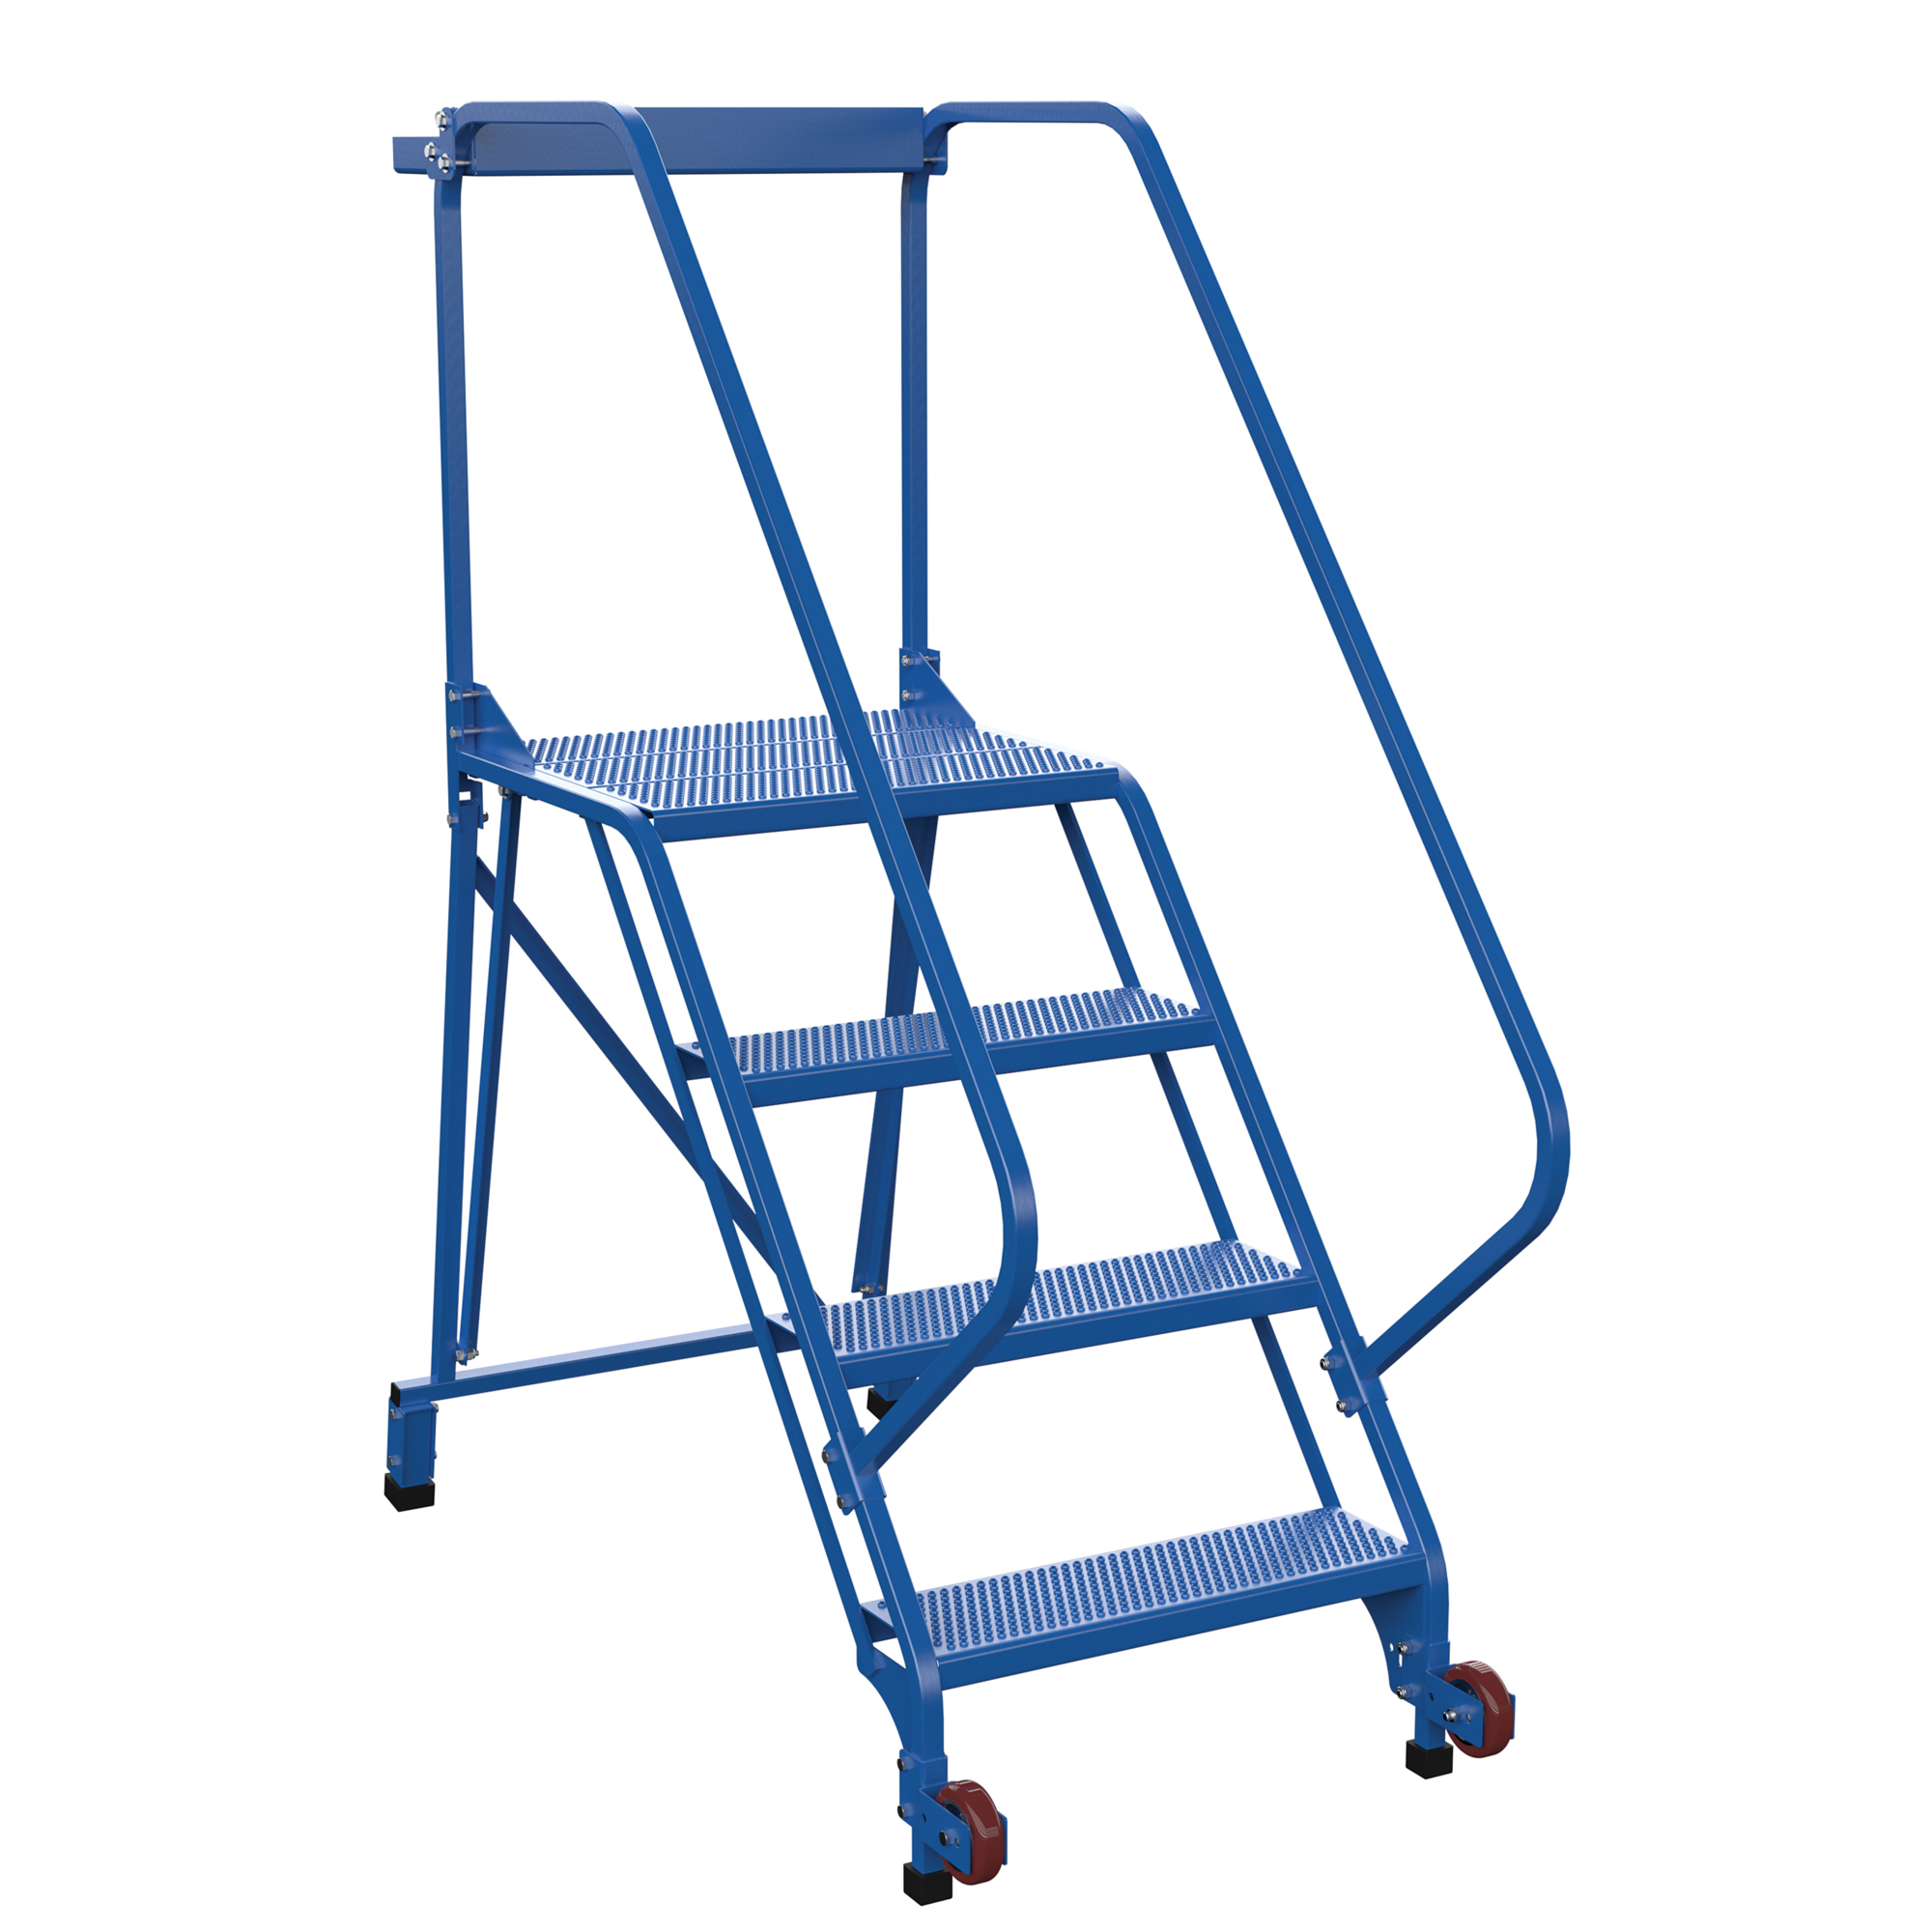 Vestil, 4 Step perforated rolling ladder, Overall Height 70 in, Steps 4 Material Steel, Model LAD-TRS-50-4-P